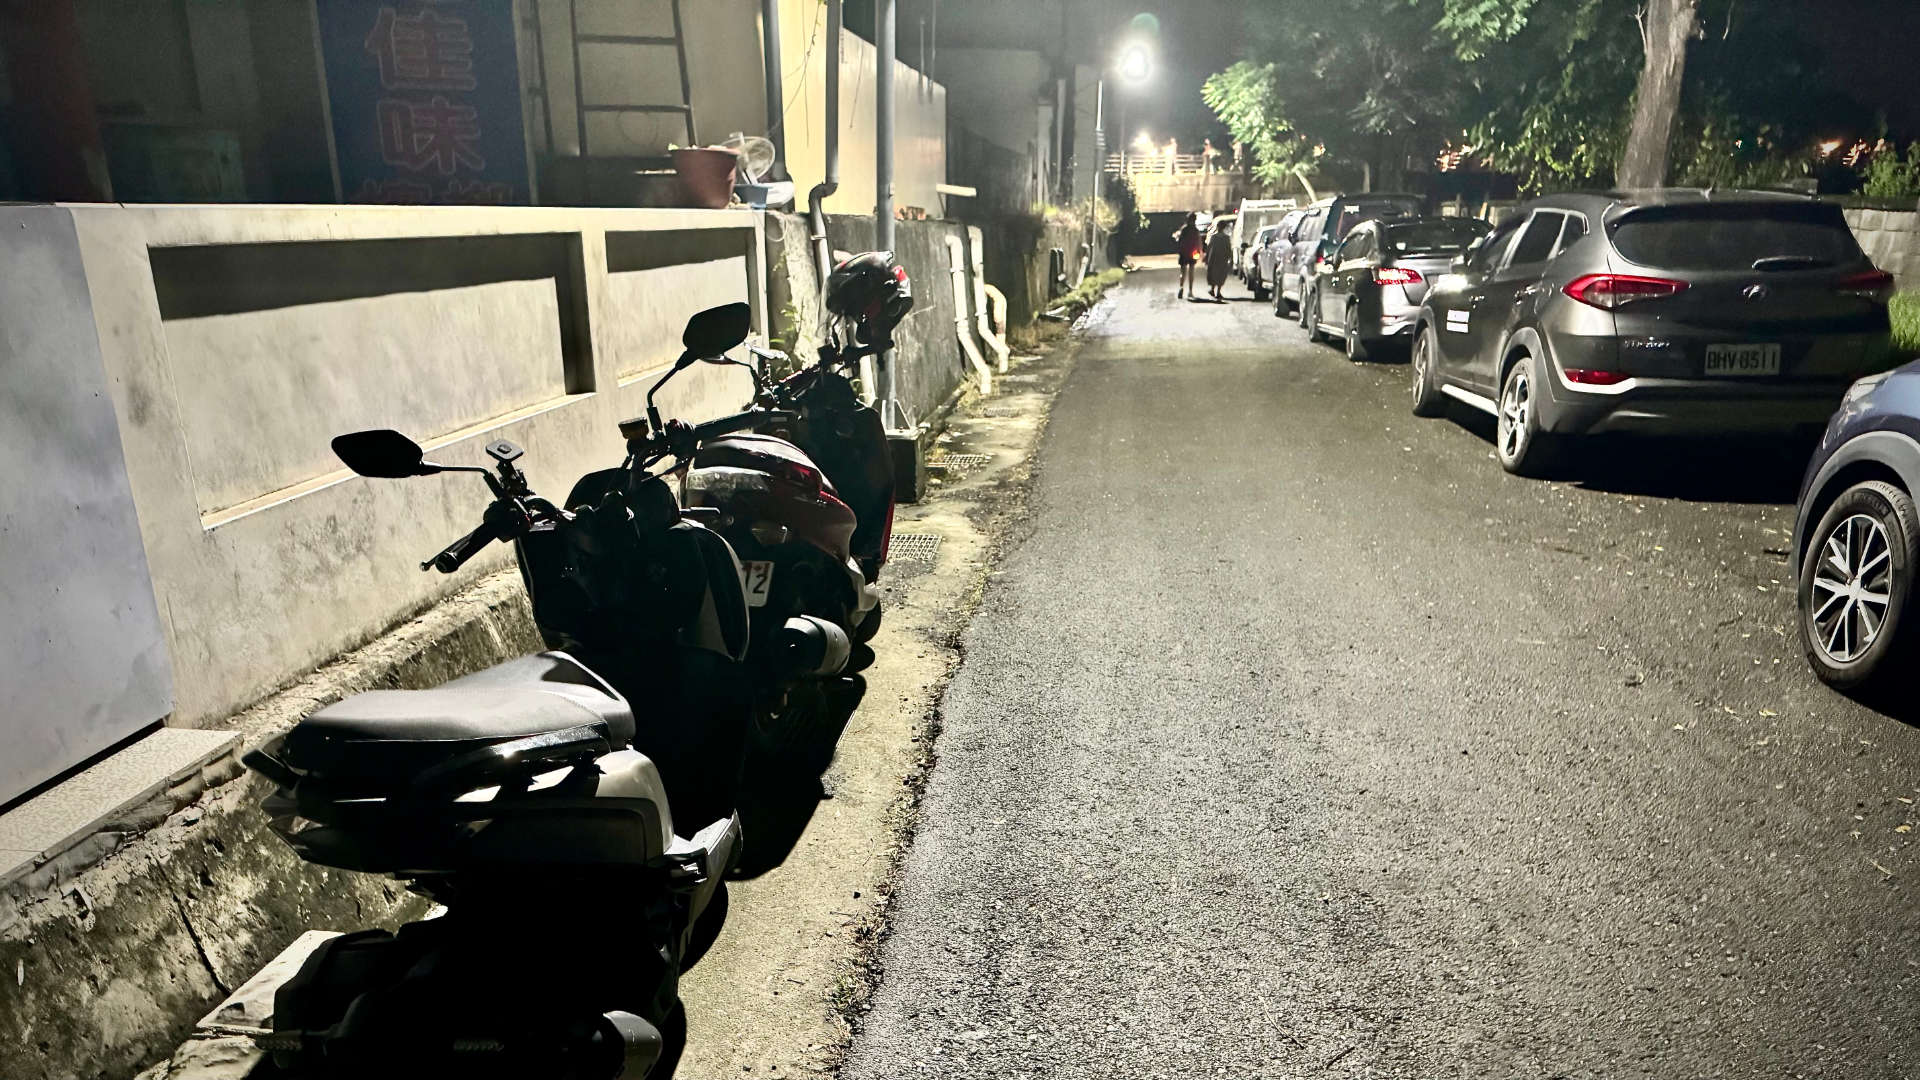 Scooters and cars parked in an alleyway at night.